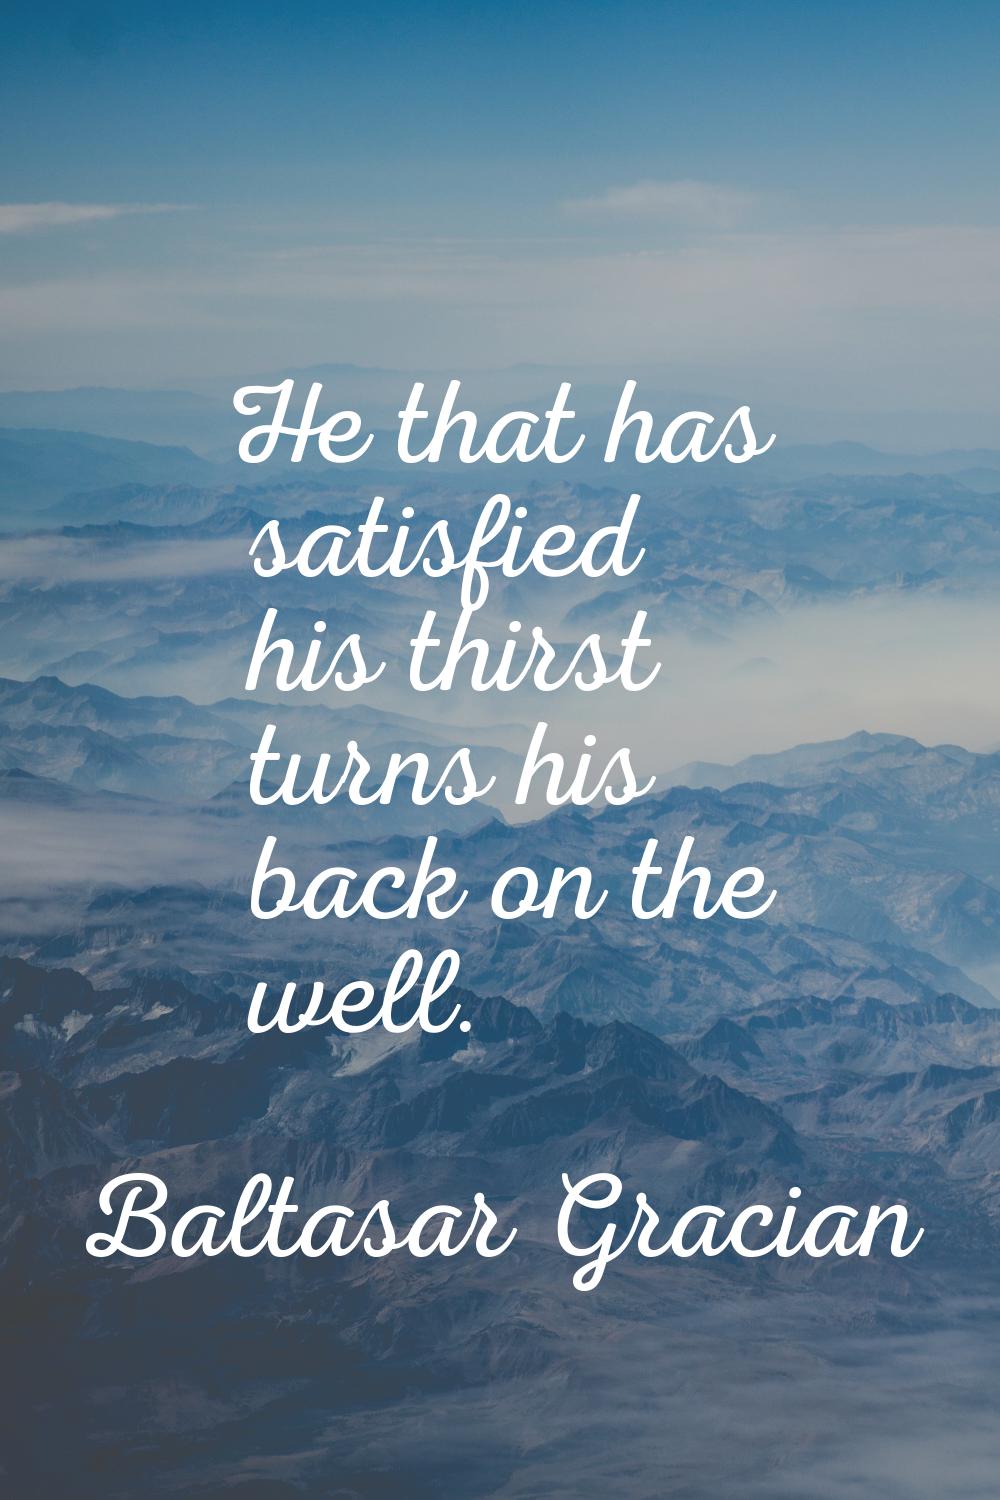 He that has satisfied his thirst turns his back on the well.